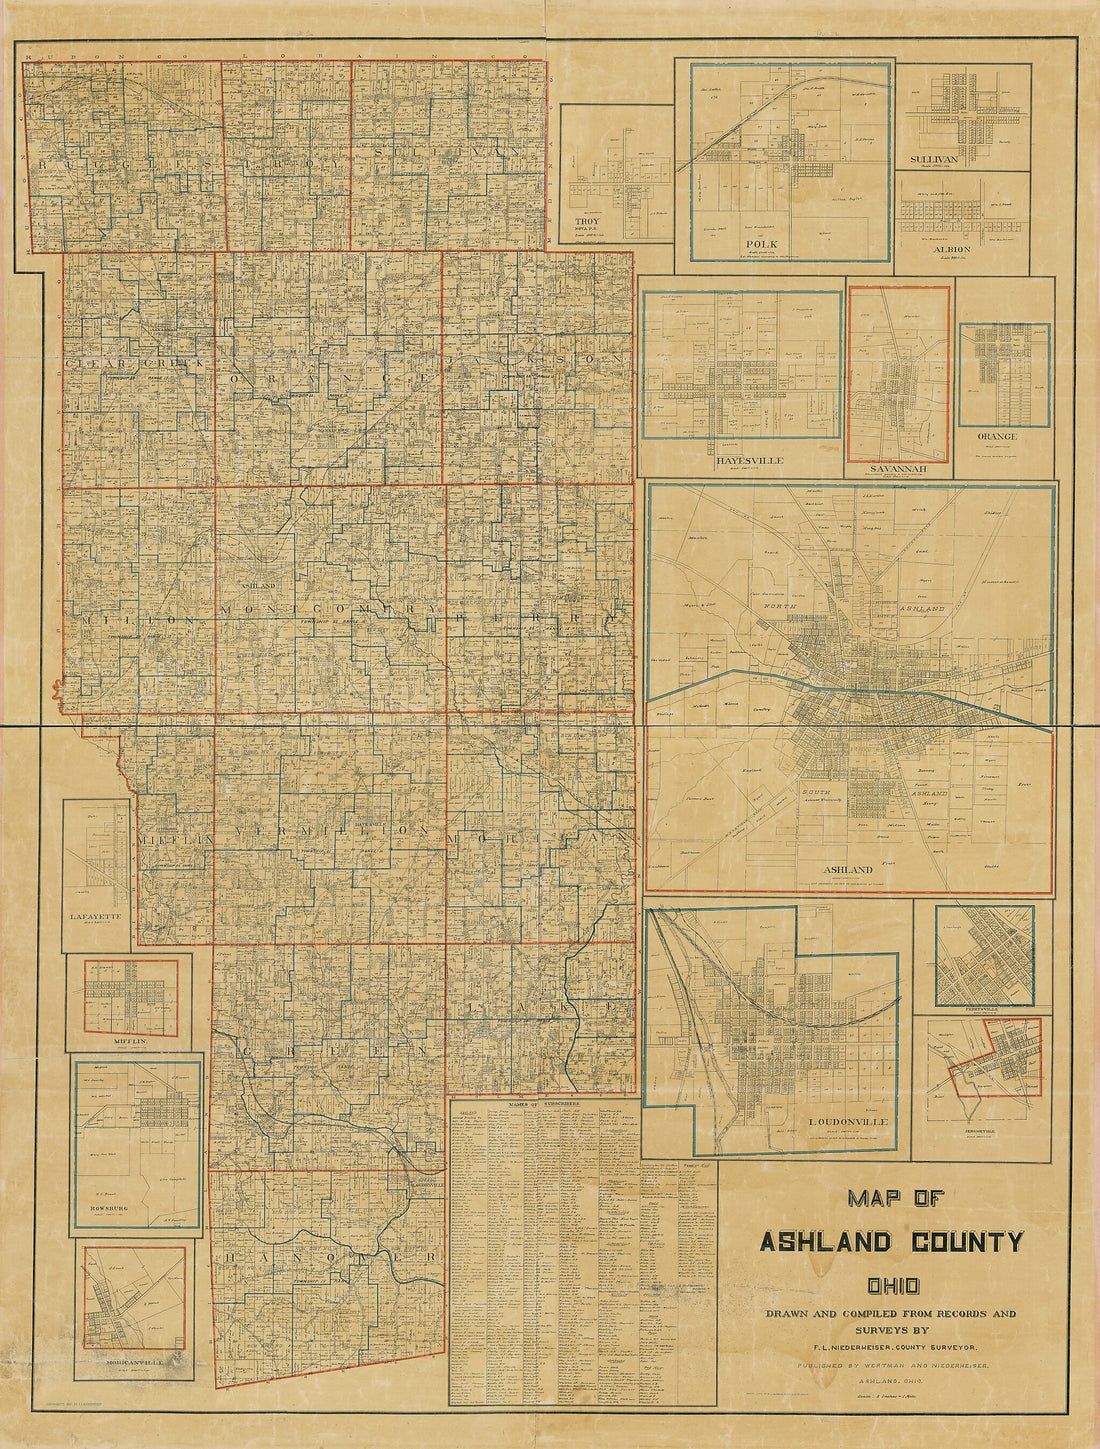 This old map of Map of Ashland County, Ohio from 1897 was created by F. L. Niederheiser in 1897